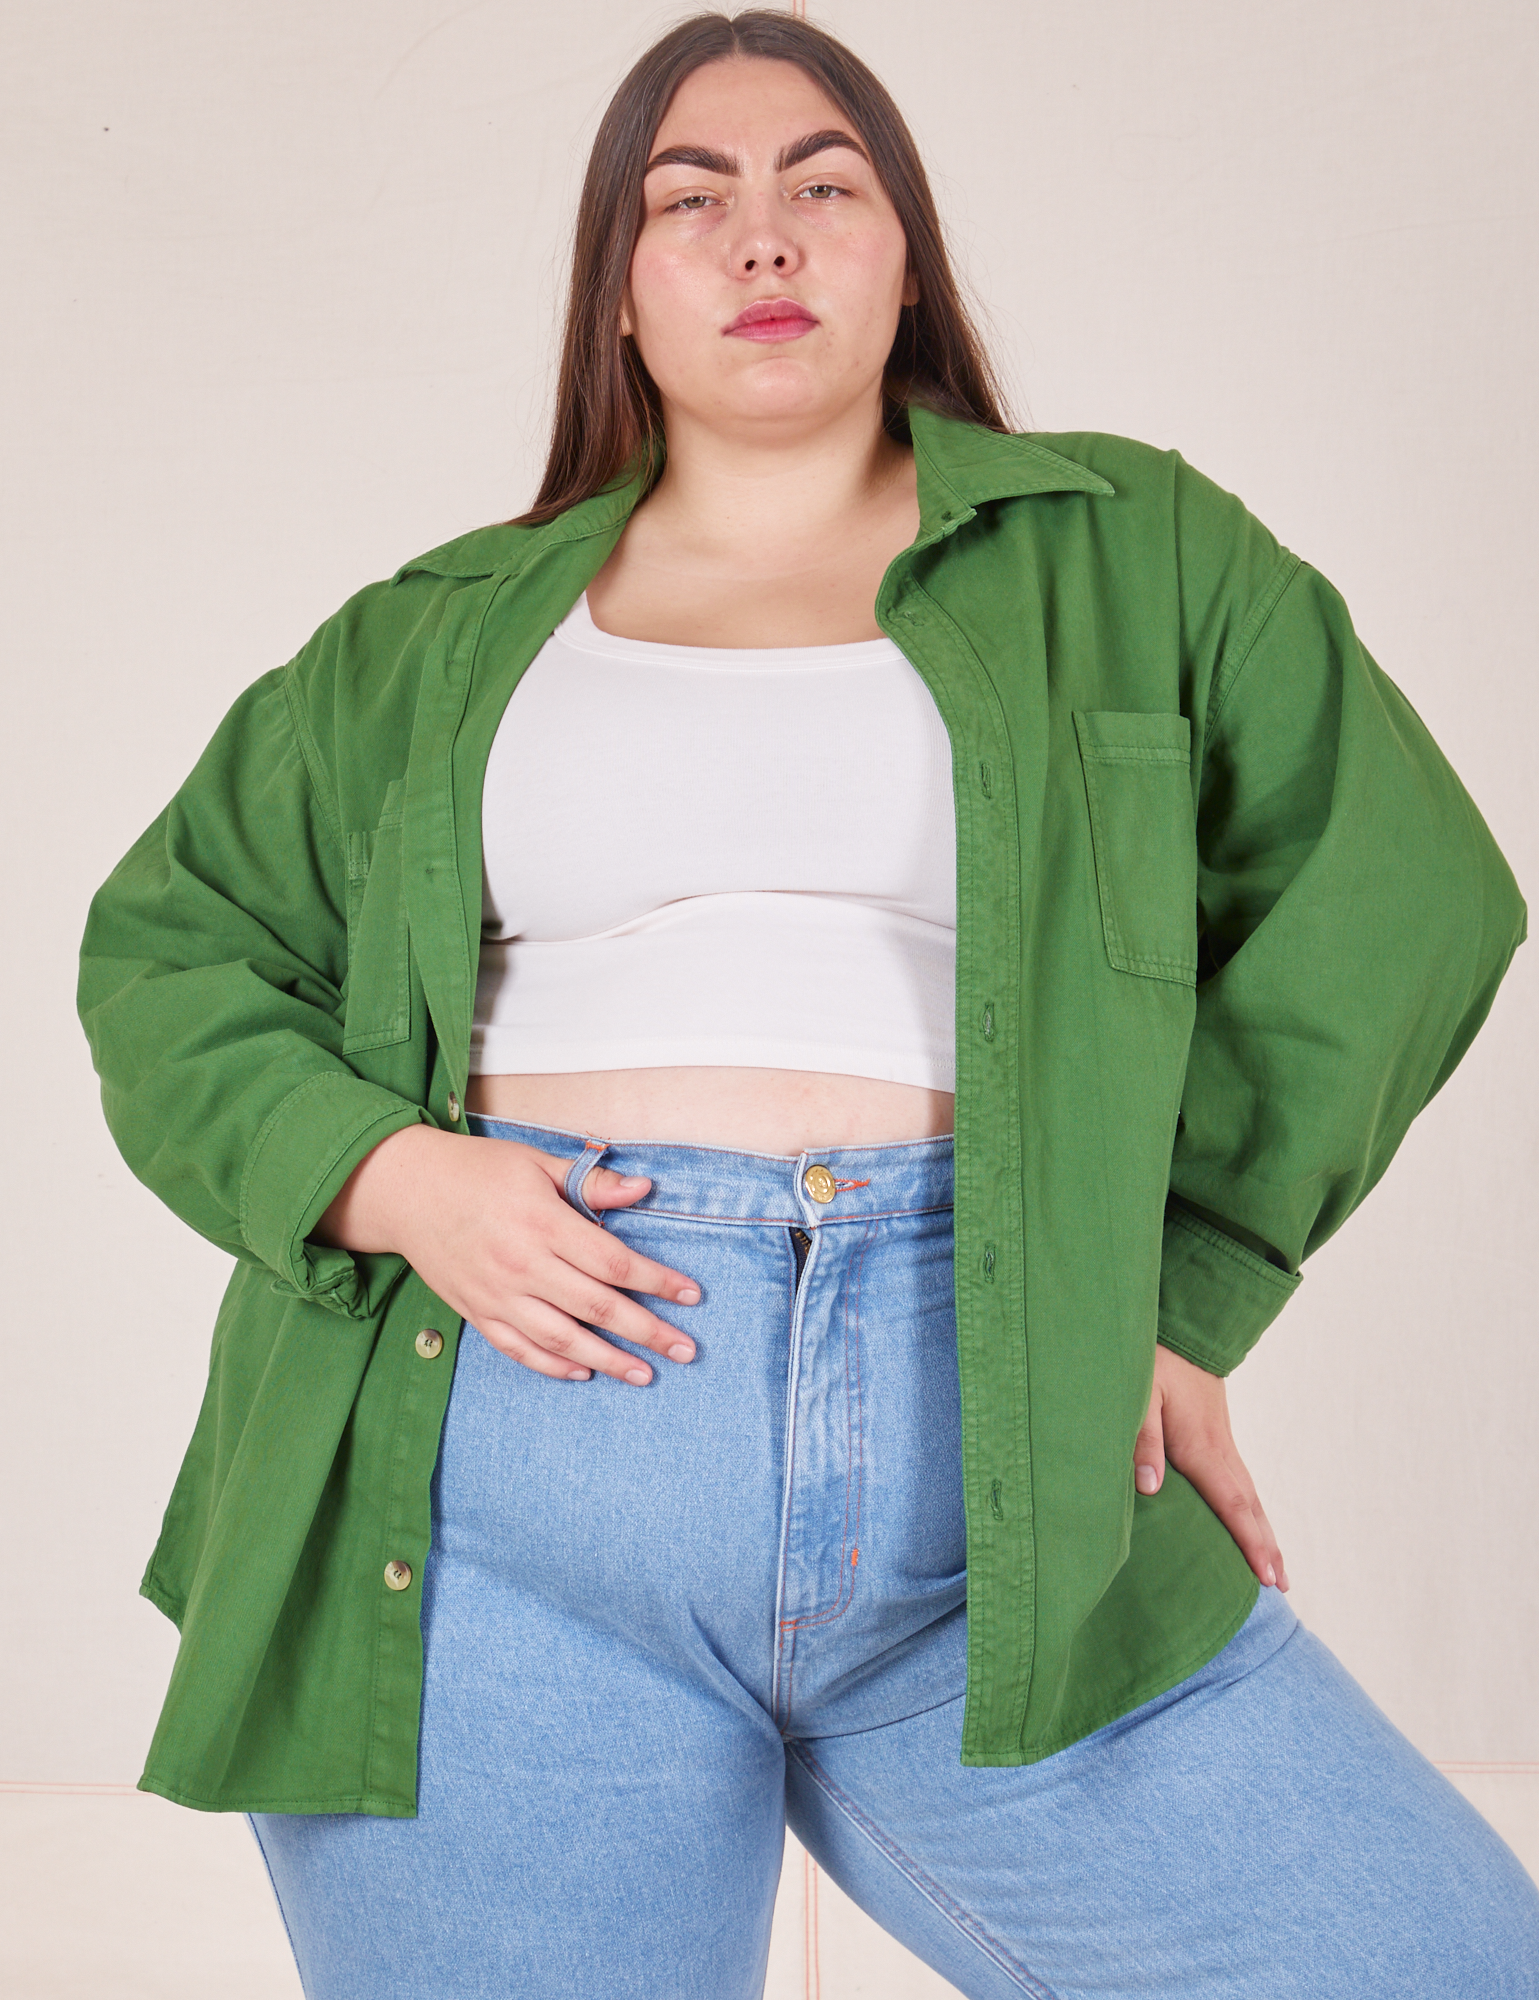 Marielena is wearing size 0XL Oversize Overshirt in Lawn Green paired with vintage off-white Cropped Tank Top